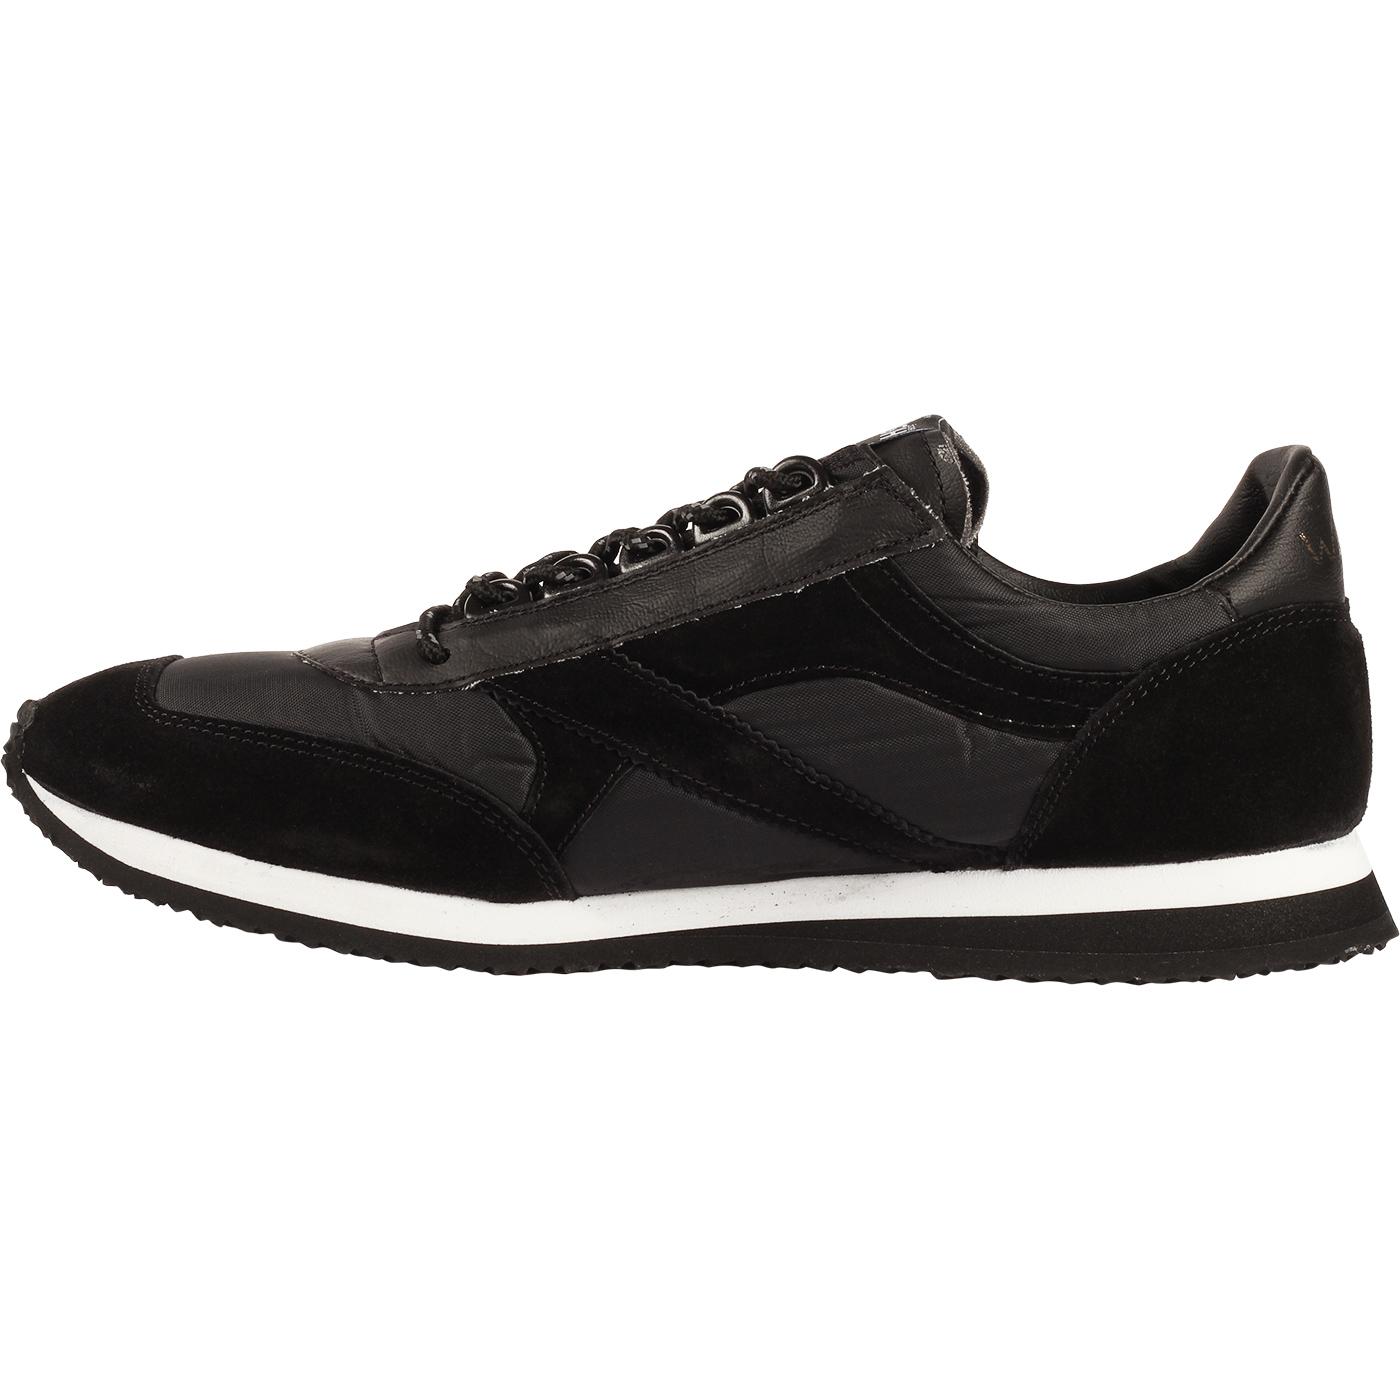 WALSH Voyager Made in England Retro Running Trainers Black